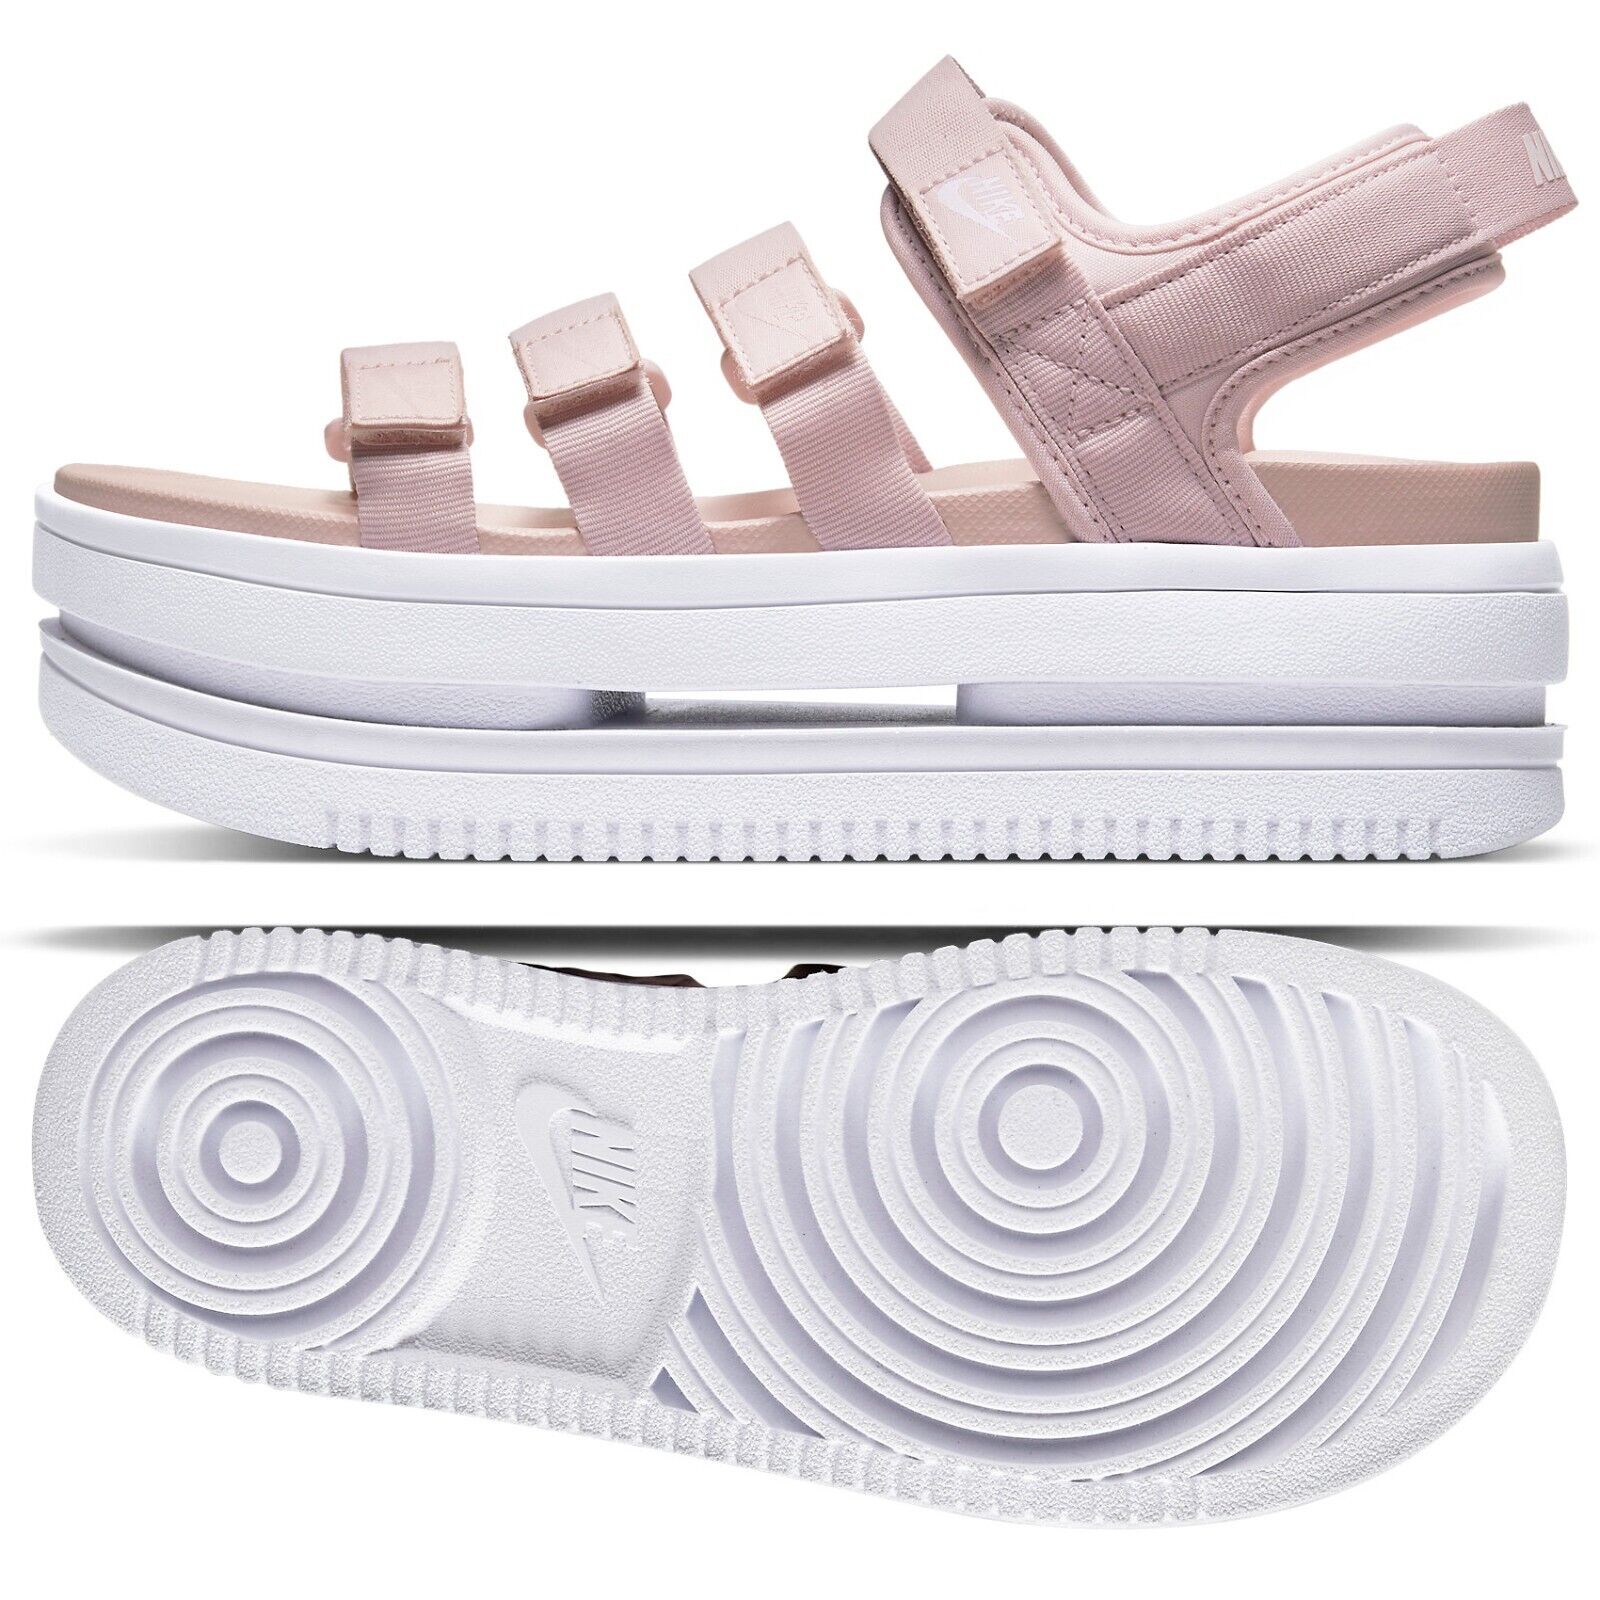 Nike Icon Classic Sandals Slides Shoes DH0224-600 Rose / White 